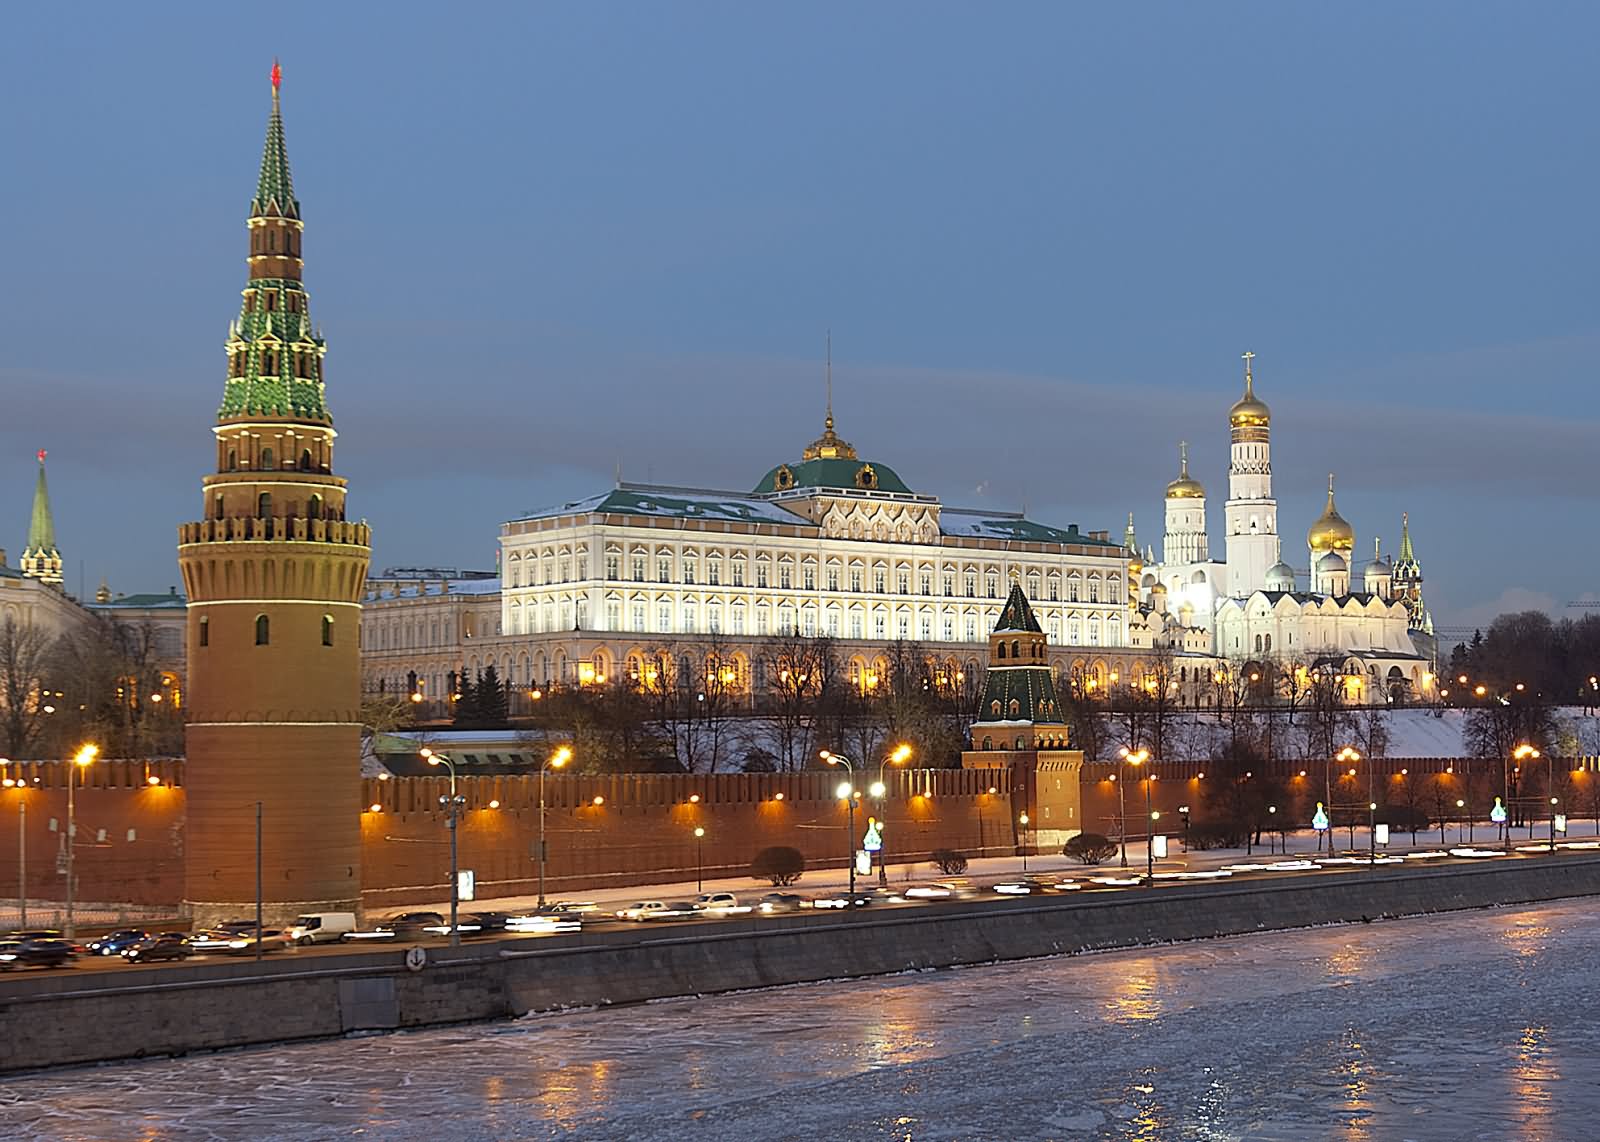 The Kremlin In Moscow During Night